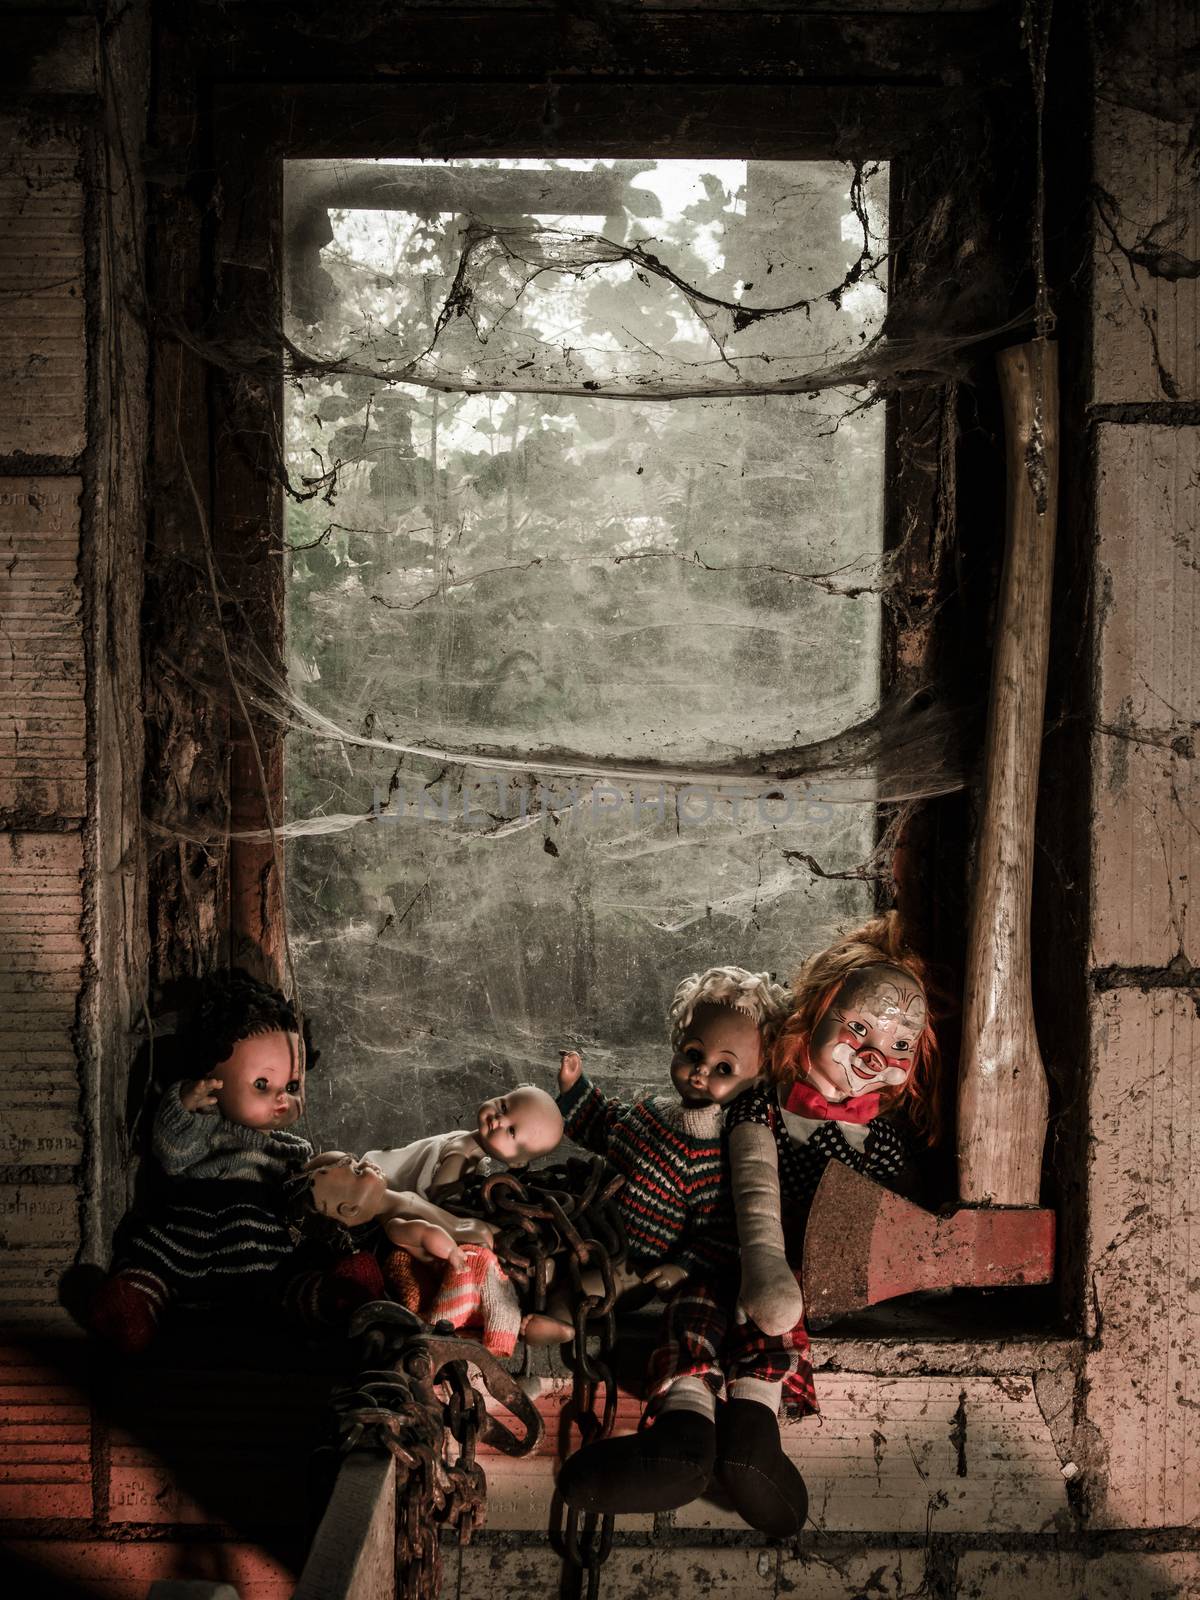 Creepy dolls and an axe by the window by sumners